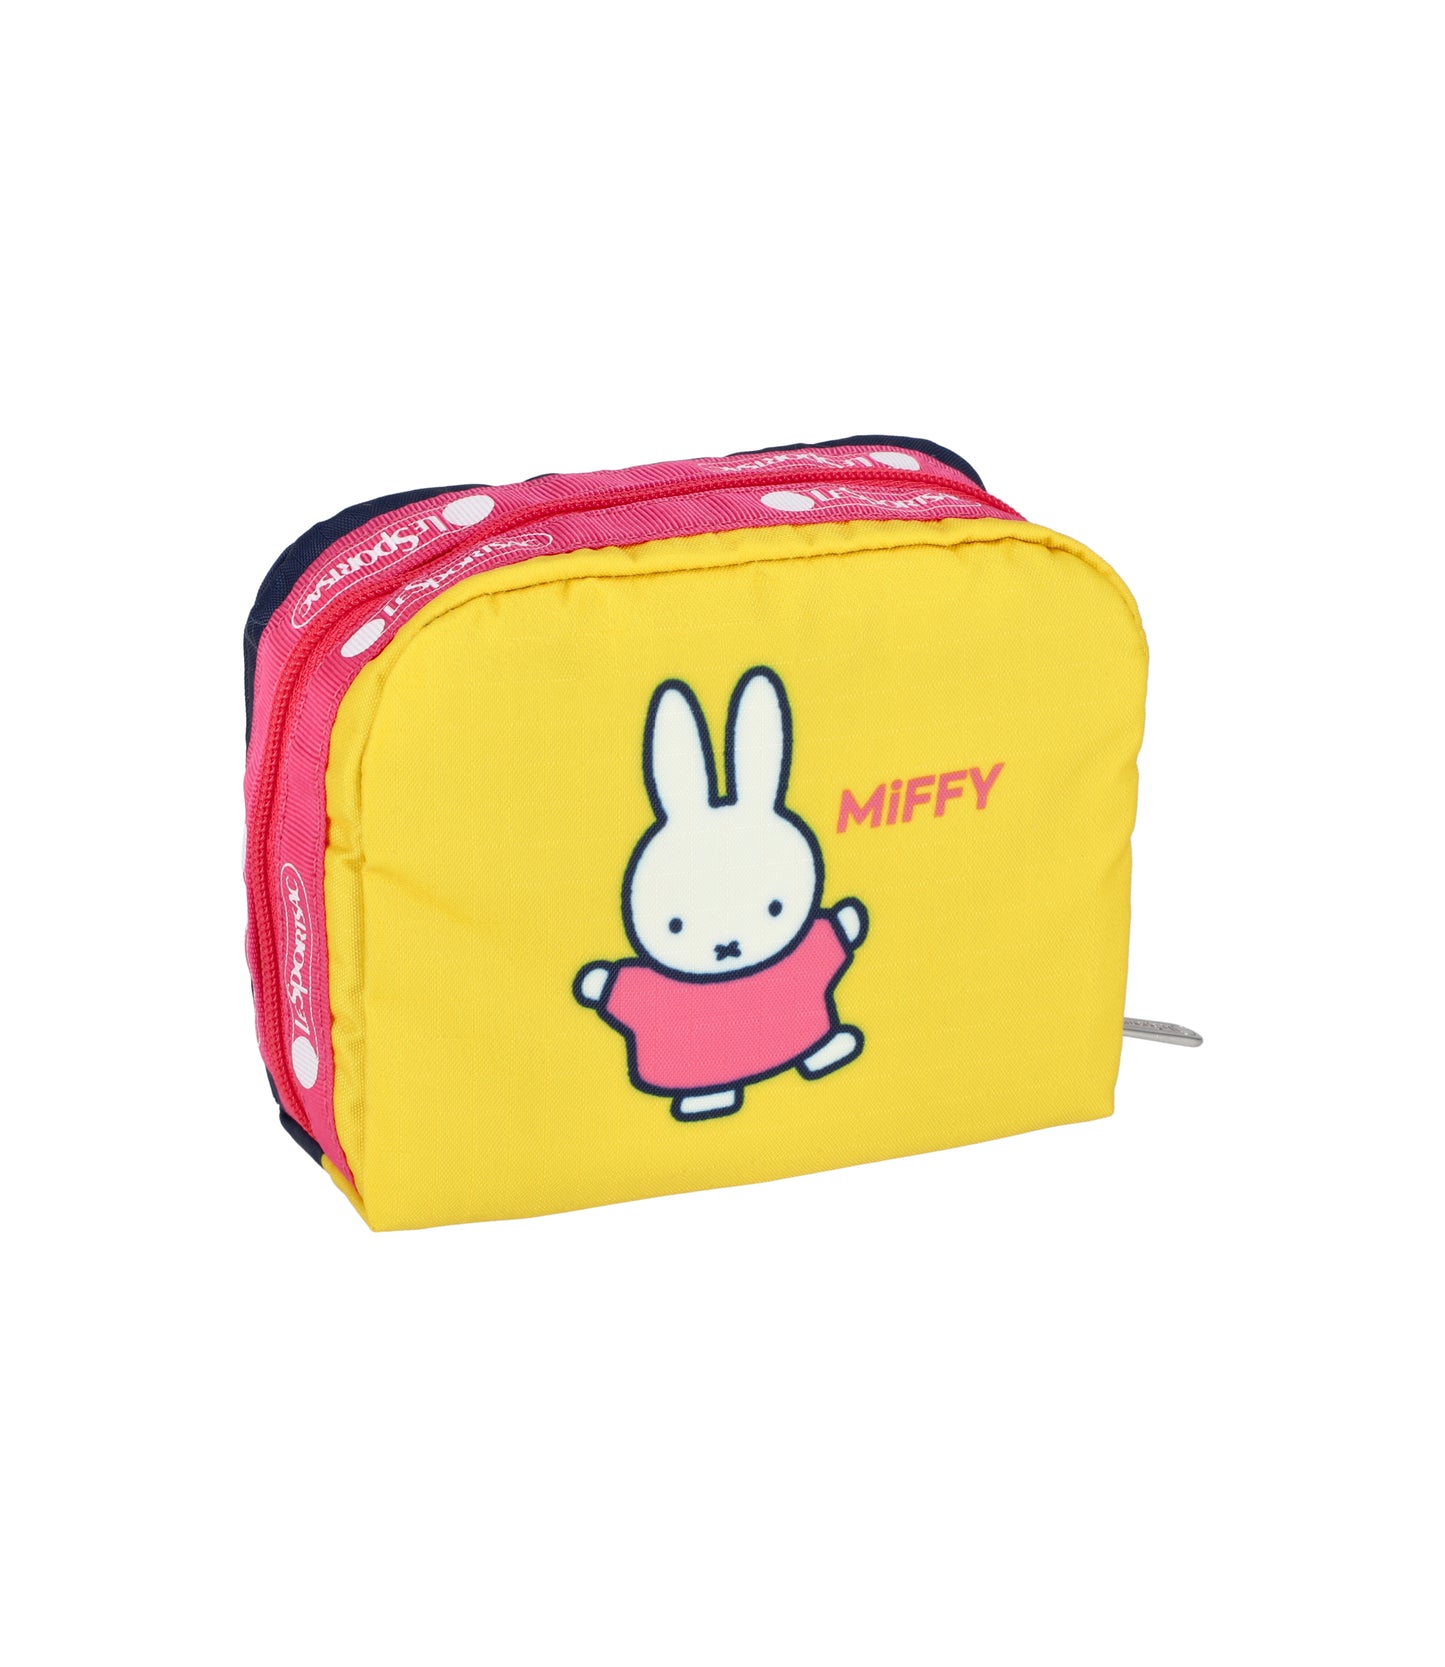 Square Cosmetic<br>Miffy Navy/ Yellow Square